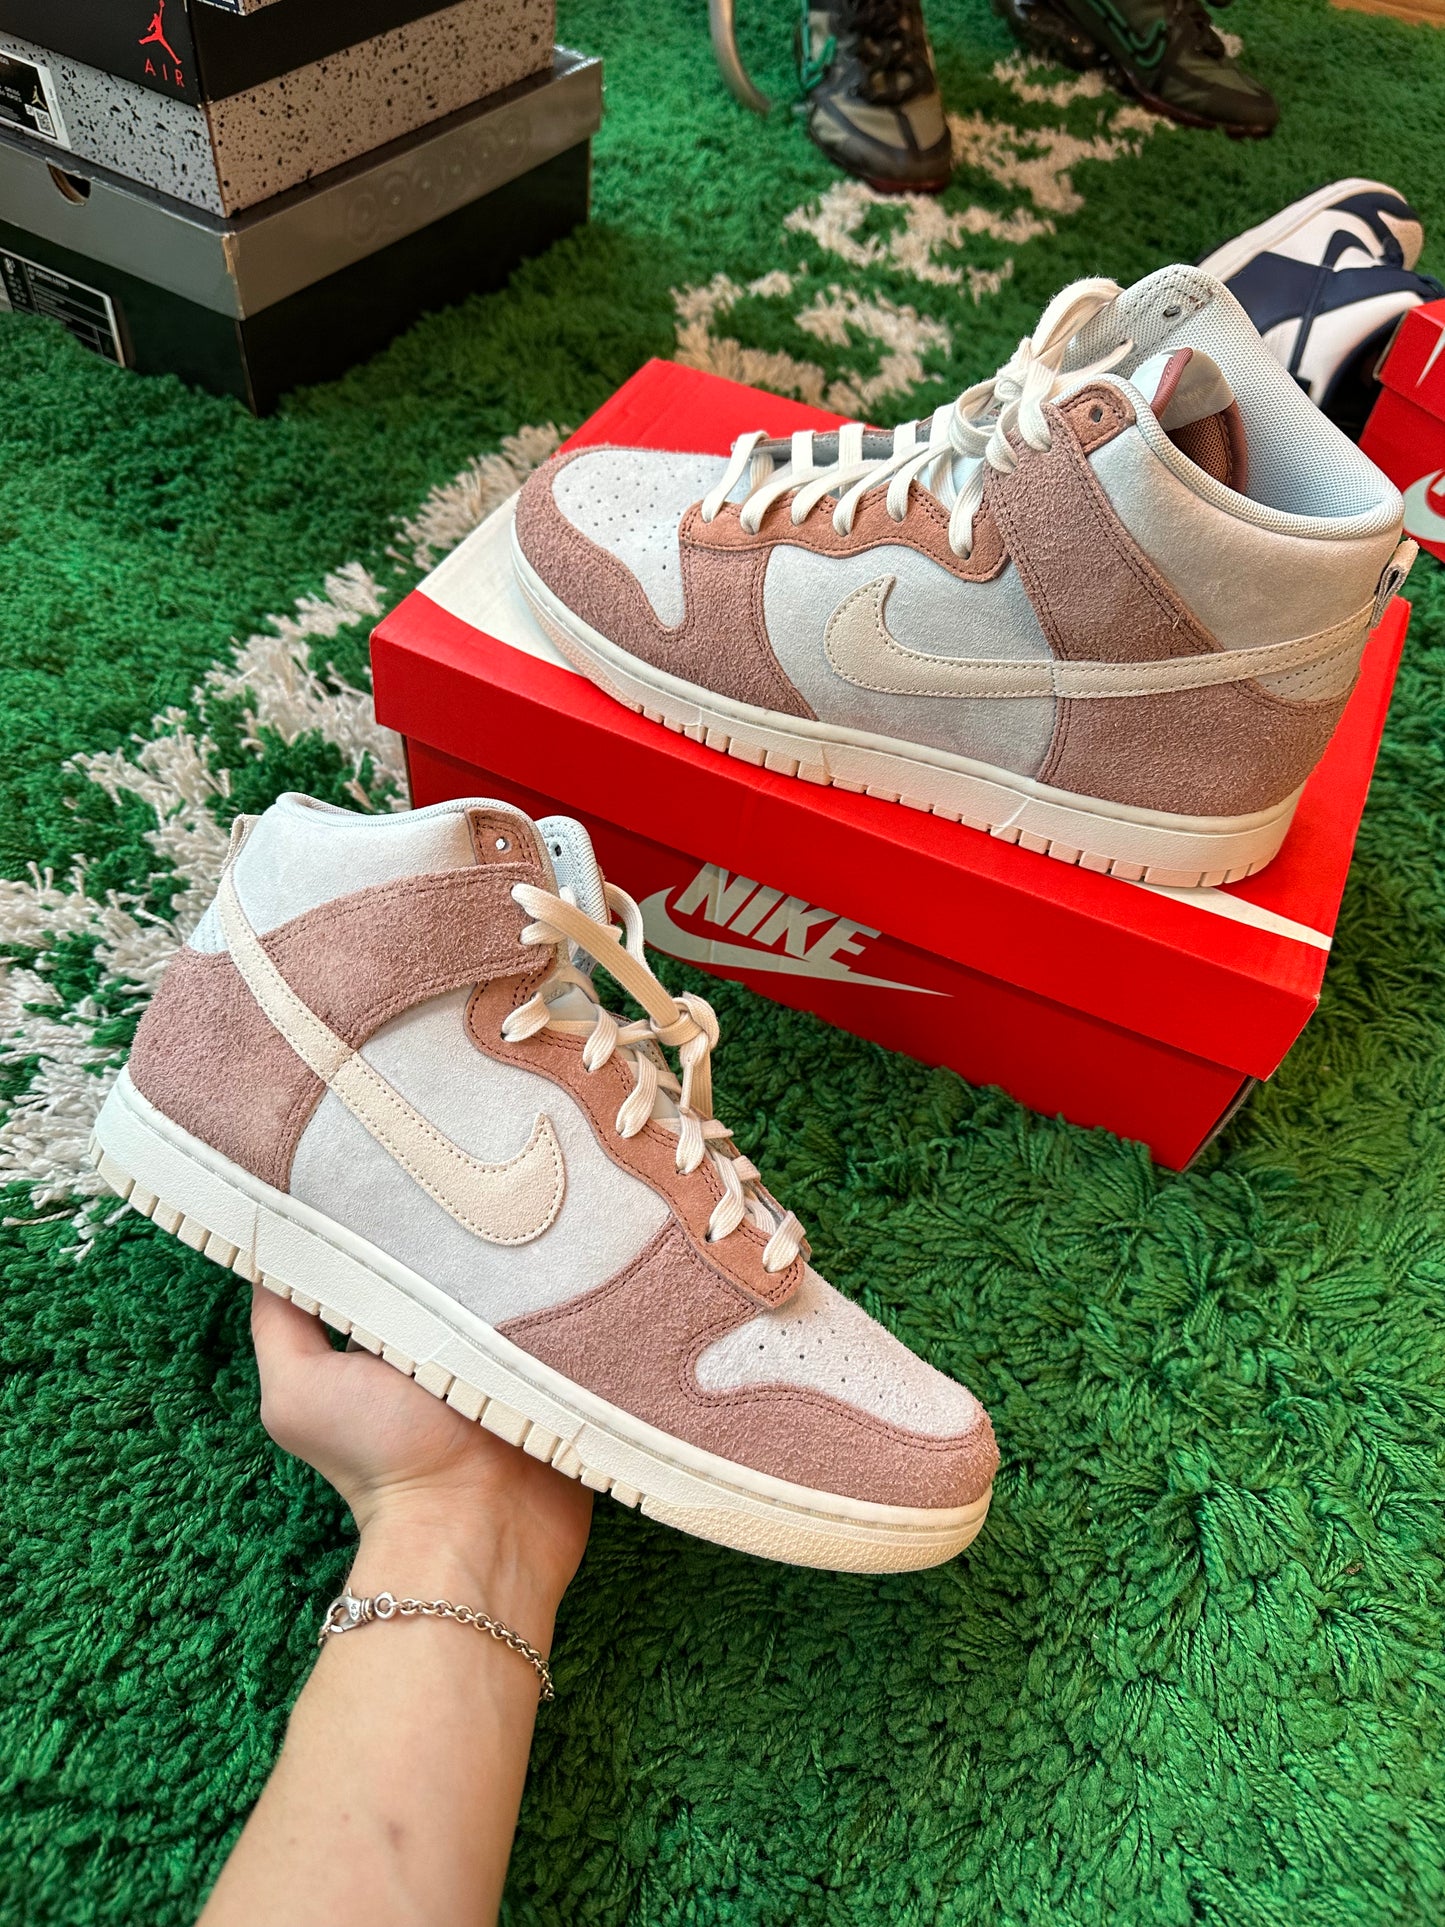 Nike Dunk High “Fossil Rose”